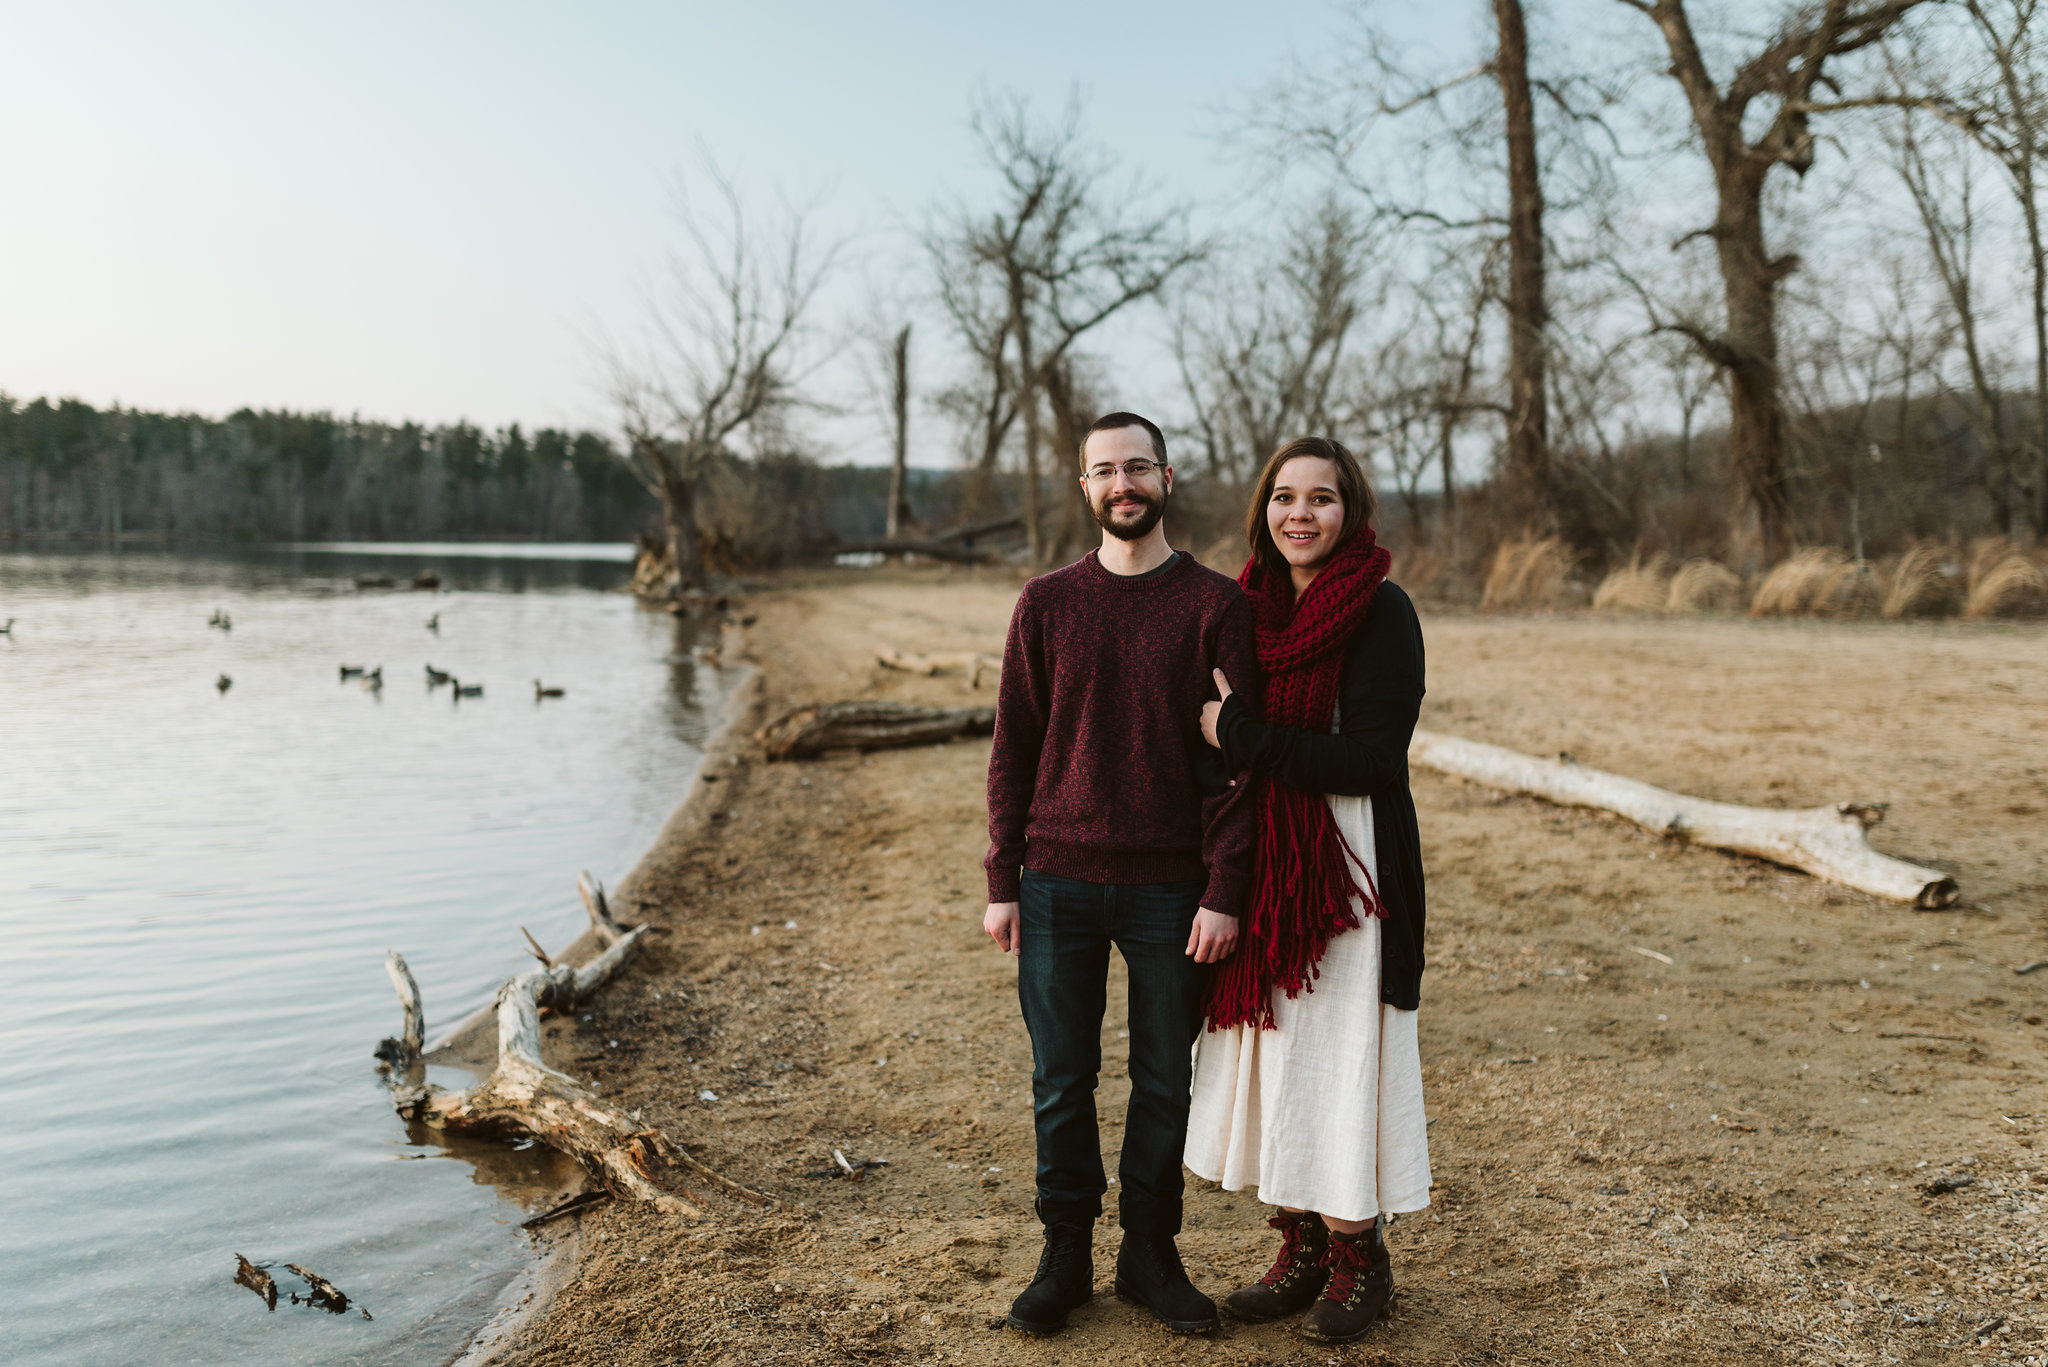  Baltimore County, Loch Raven Reservoir, Maryland Wedding Photographer, Winter, Engagement Photos, Nature, Romantic, Classic, Bride and Groom Standing Together on Shoreline, Woodland, Rustic 